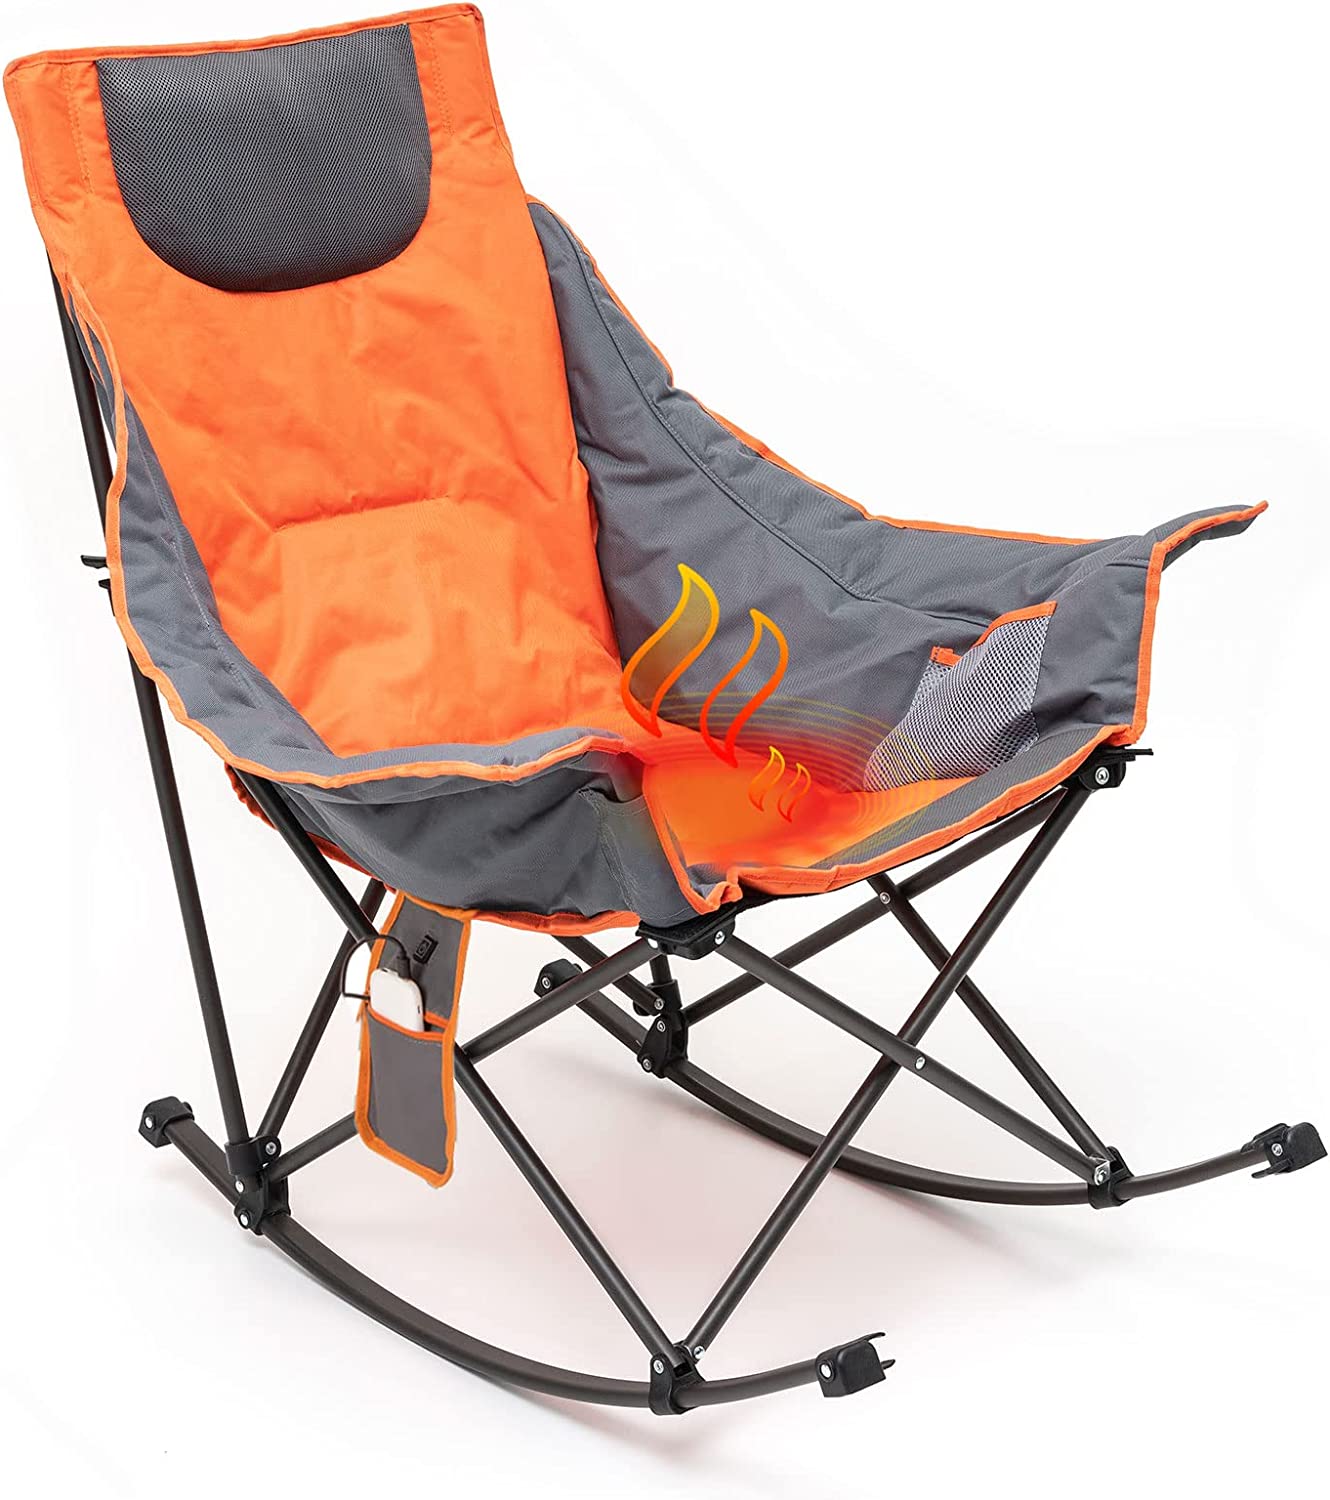 Review of SunnyFeel Oversized Heated Camping Chair ,Hot Seat